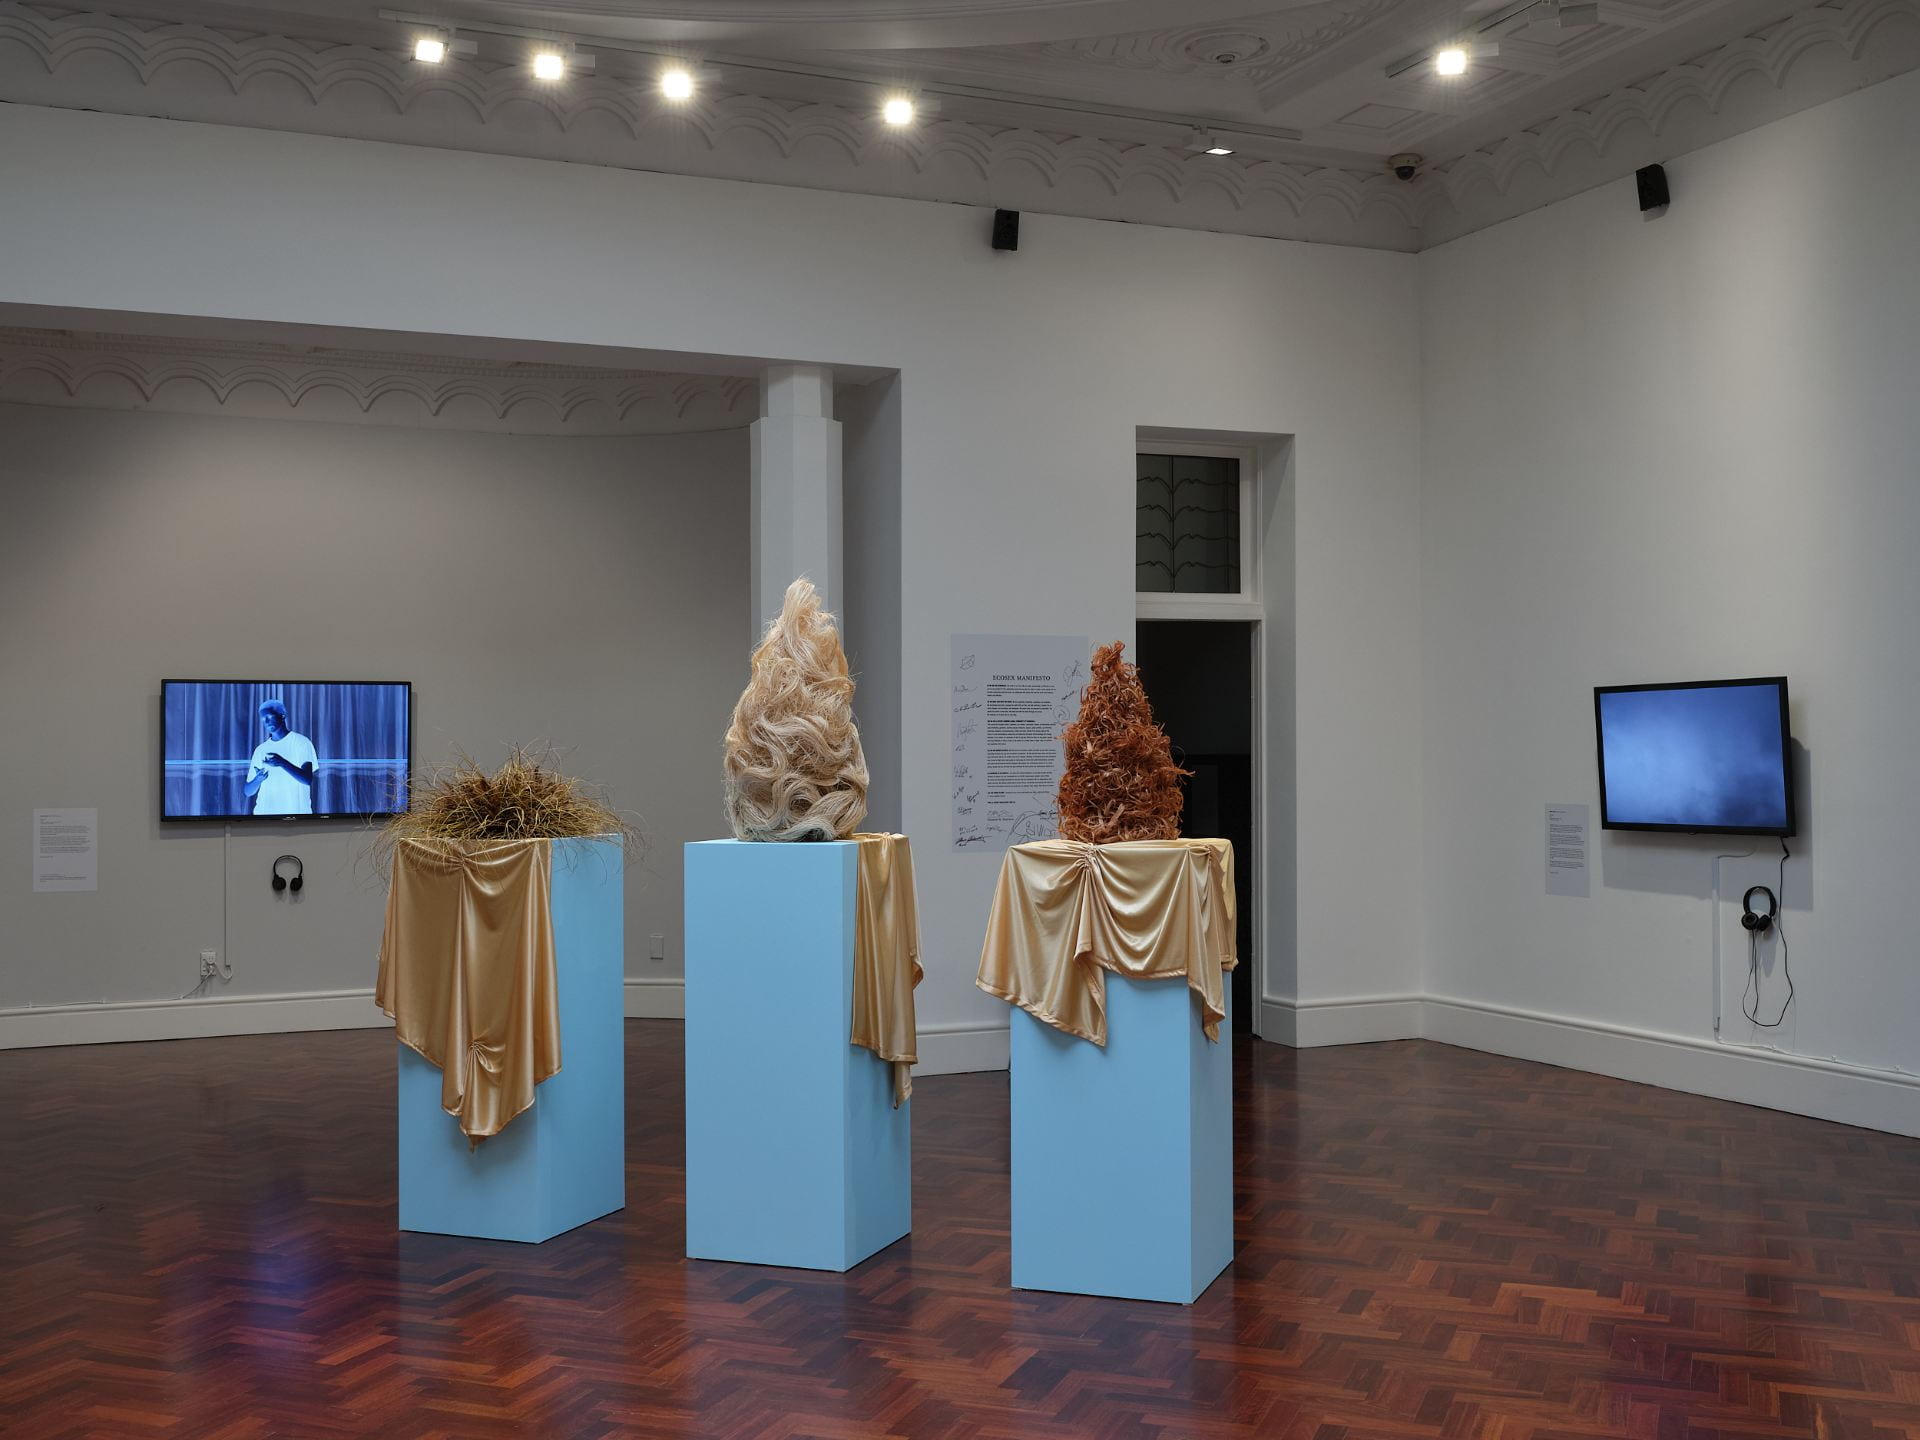 Three tall wigs made of plant fibres are arranged on three pale blue plinths, with golden fabric draped over each. In the background, two TVs mounted on adjacent walls play films.